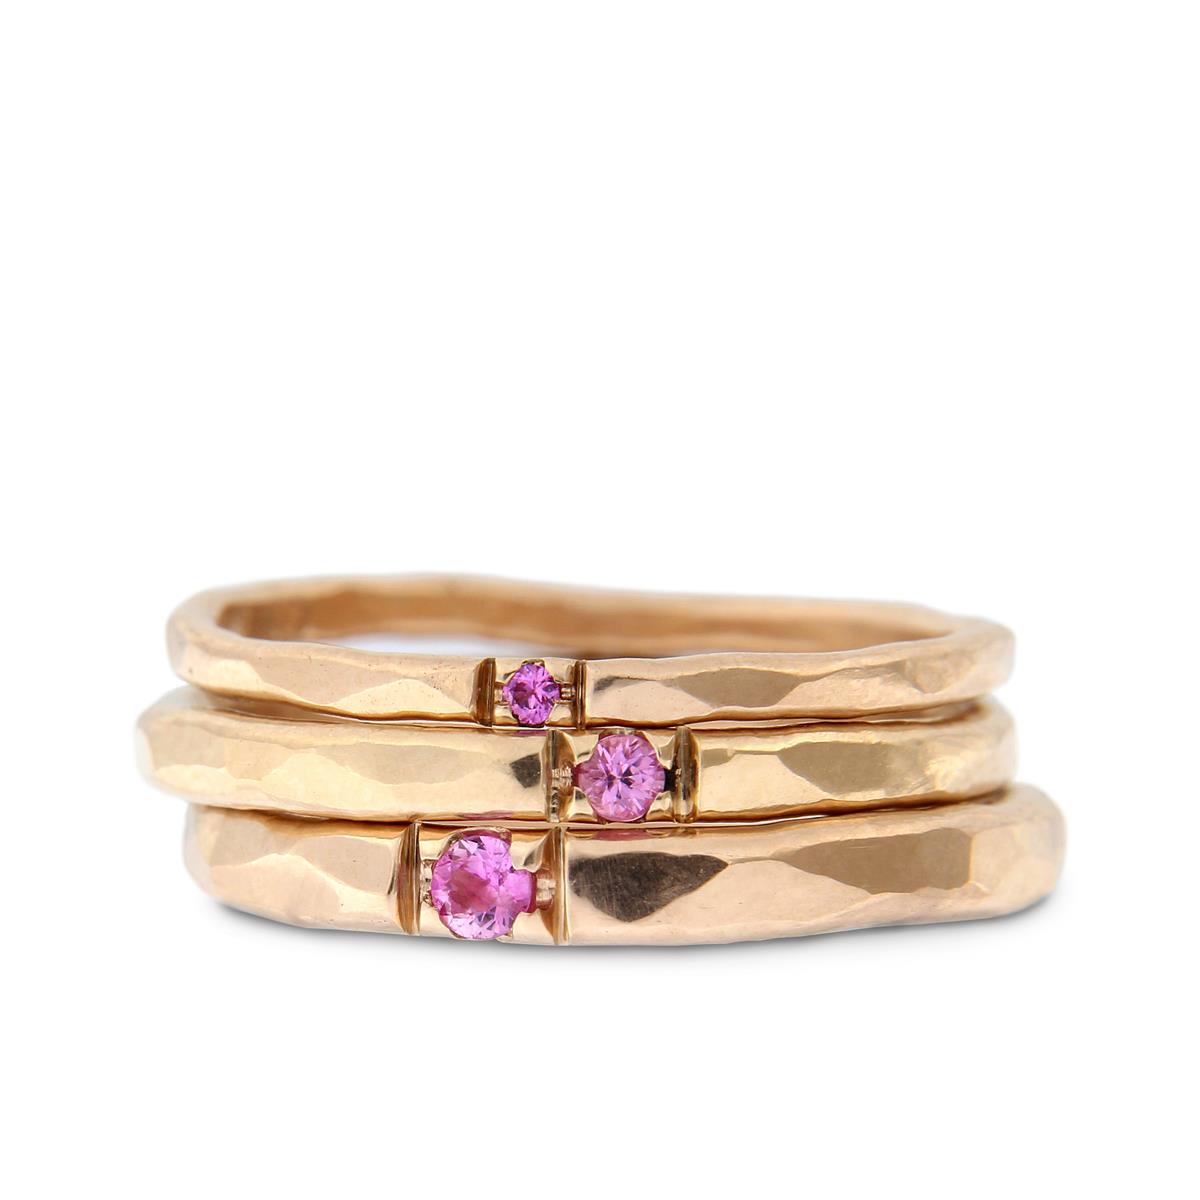 Katie g. Jewellery_Stack - Hammered Rings 1,5 bis 2,5mm in 14kt. Roségold mit rosa Saphir